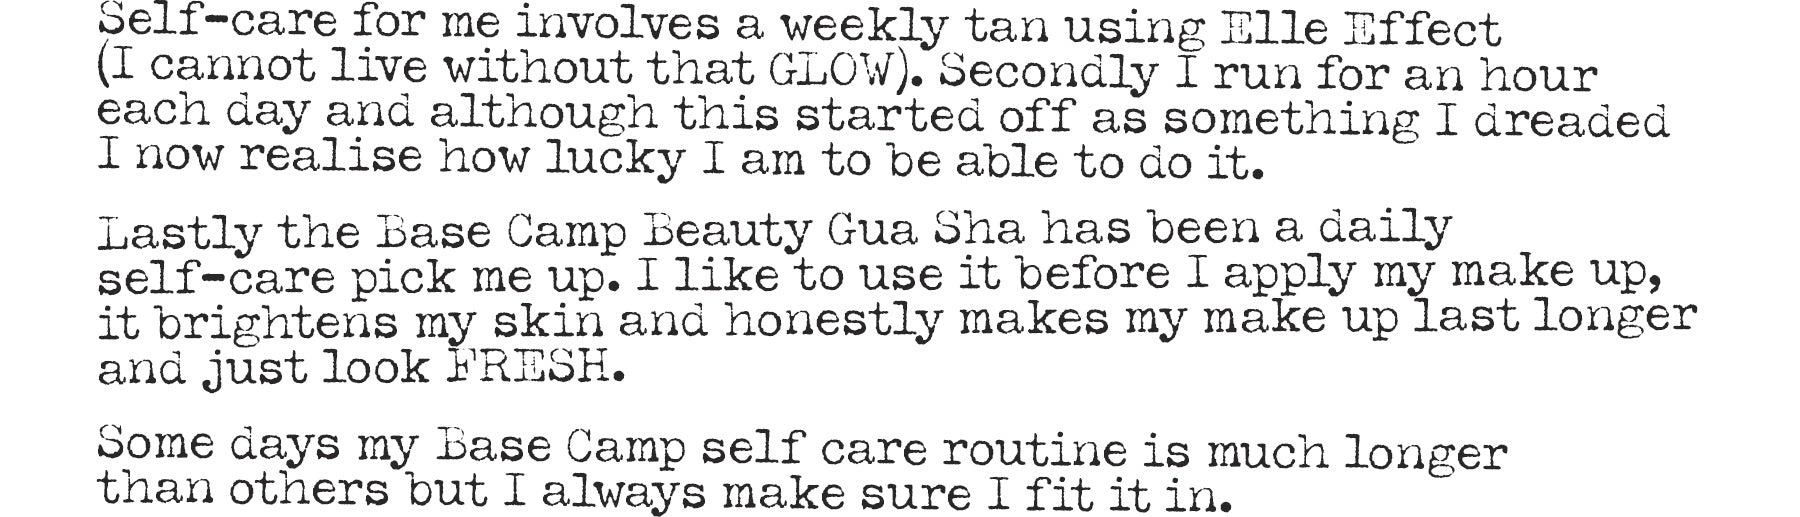 Self care for me involves a weekly tan using Elle Effect (I cannot live without that GLOW), Secondly I run for an hour each day and although this started off as something I dreaded I now realise how lucky I am to be able to do it. Lastly The Base Camp Beauty Gua Sha has been a daily self care pick me up. I like to use it before I apply my make up, it brightens my skin and honestly makes my make up last longer and just look FRESH. Some days my Base Camp self care routine is much longer than other but I always make sure I fit it in.